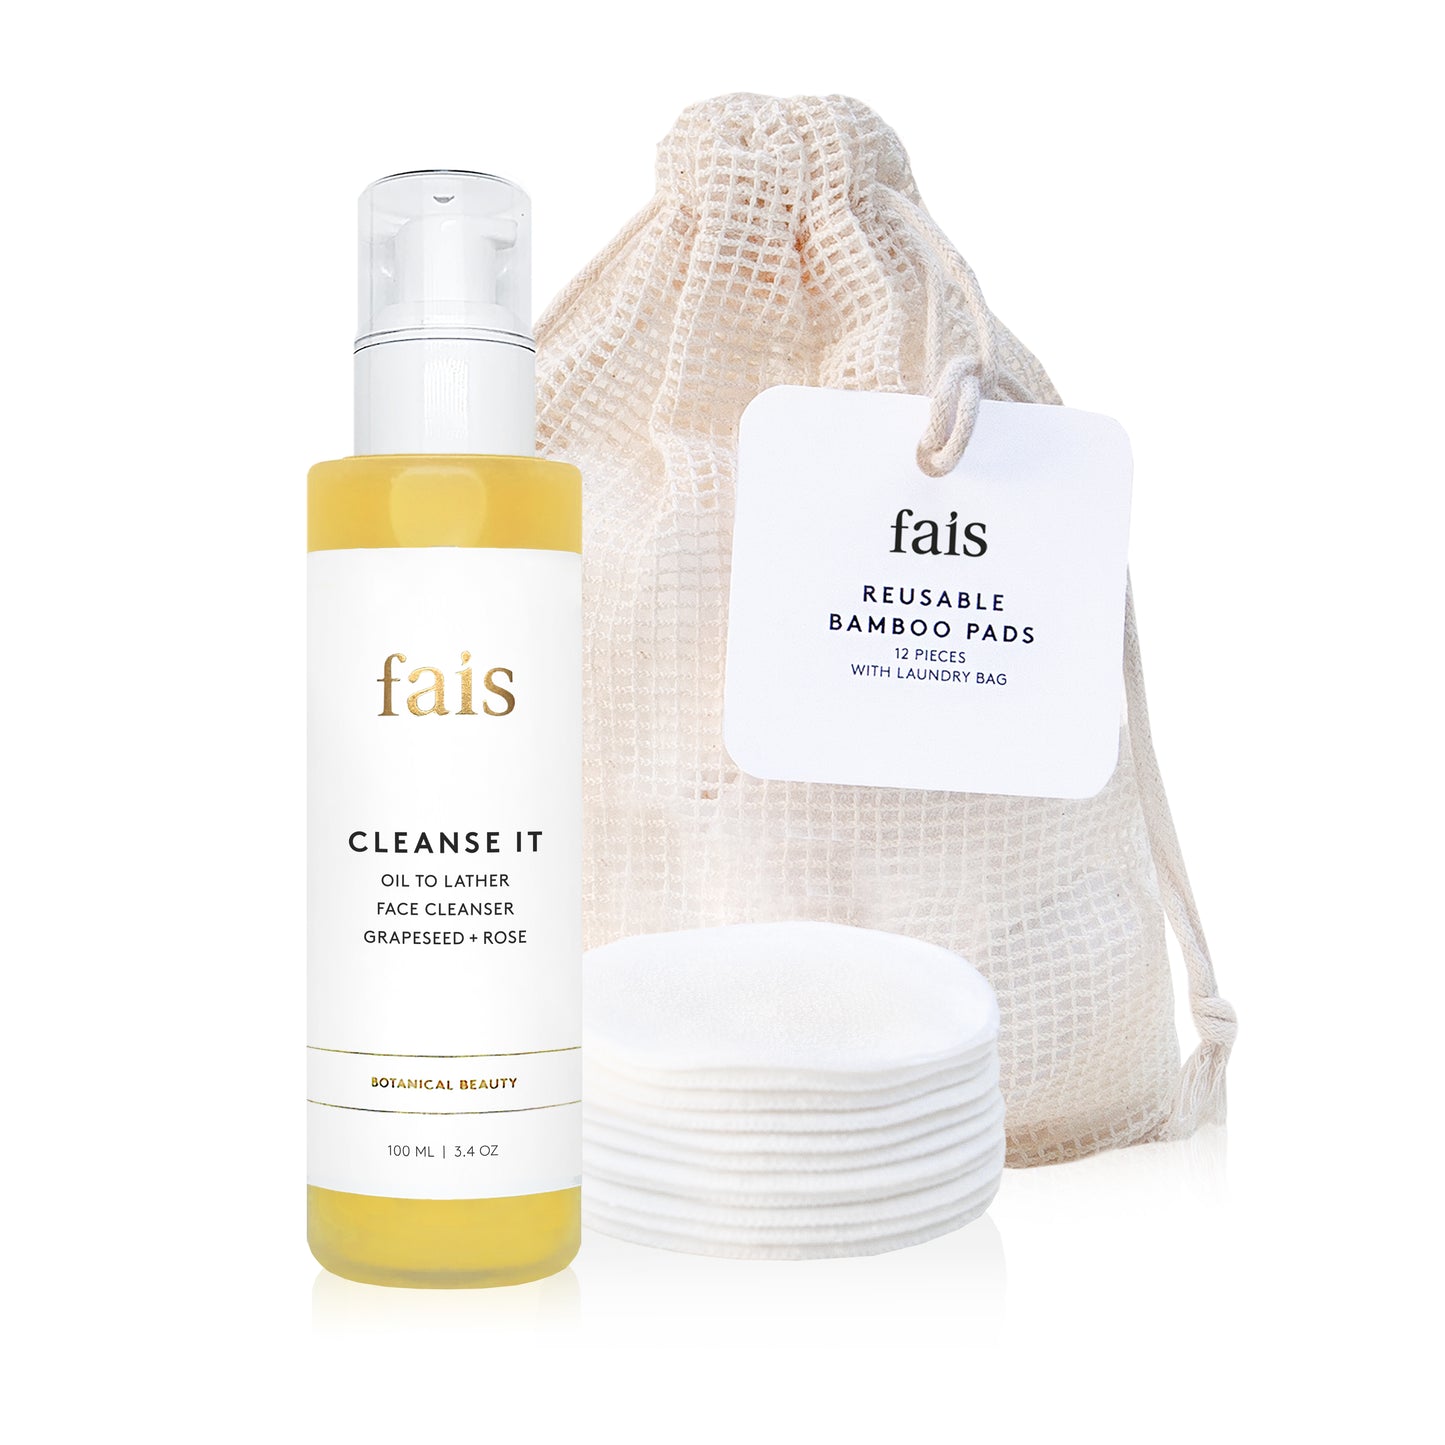 Perfectly Clean Face Cleanser and Reusable Bamboo Pads Set